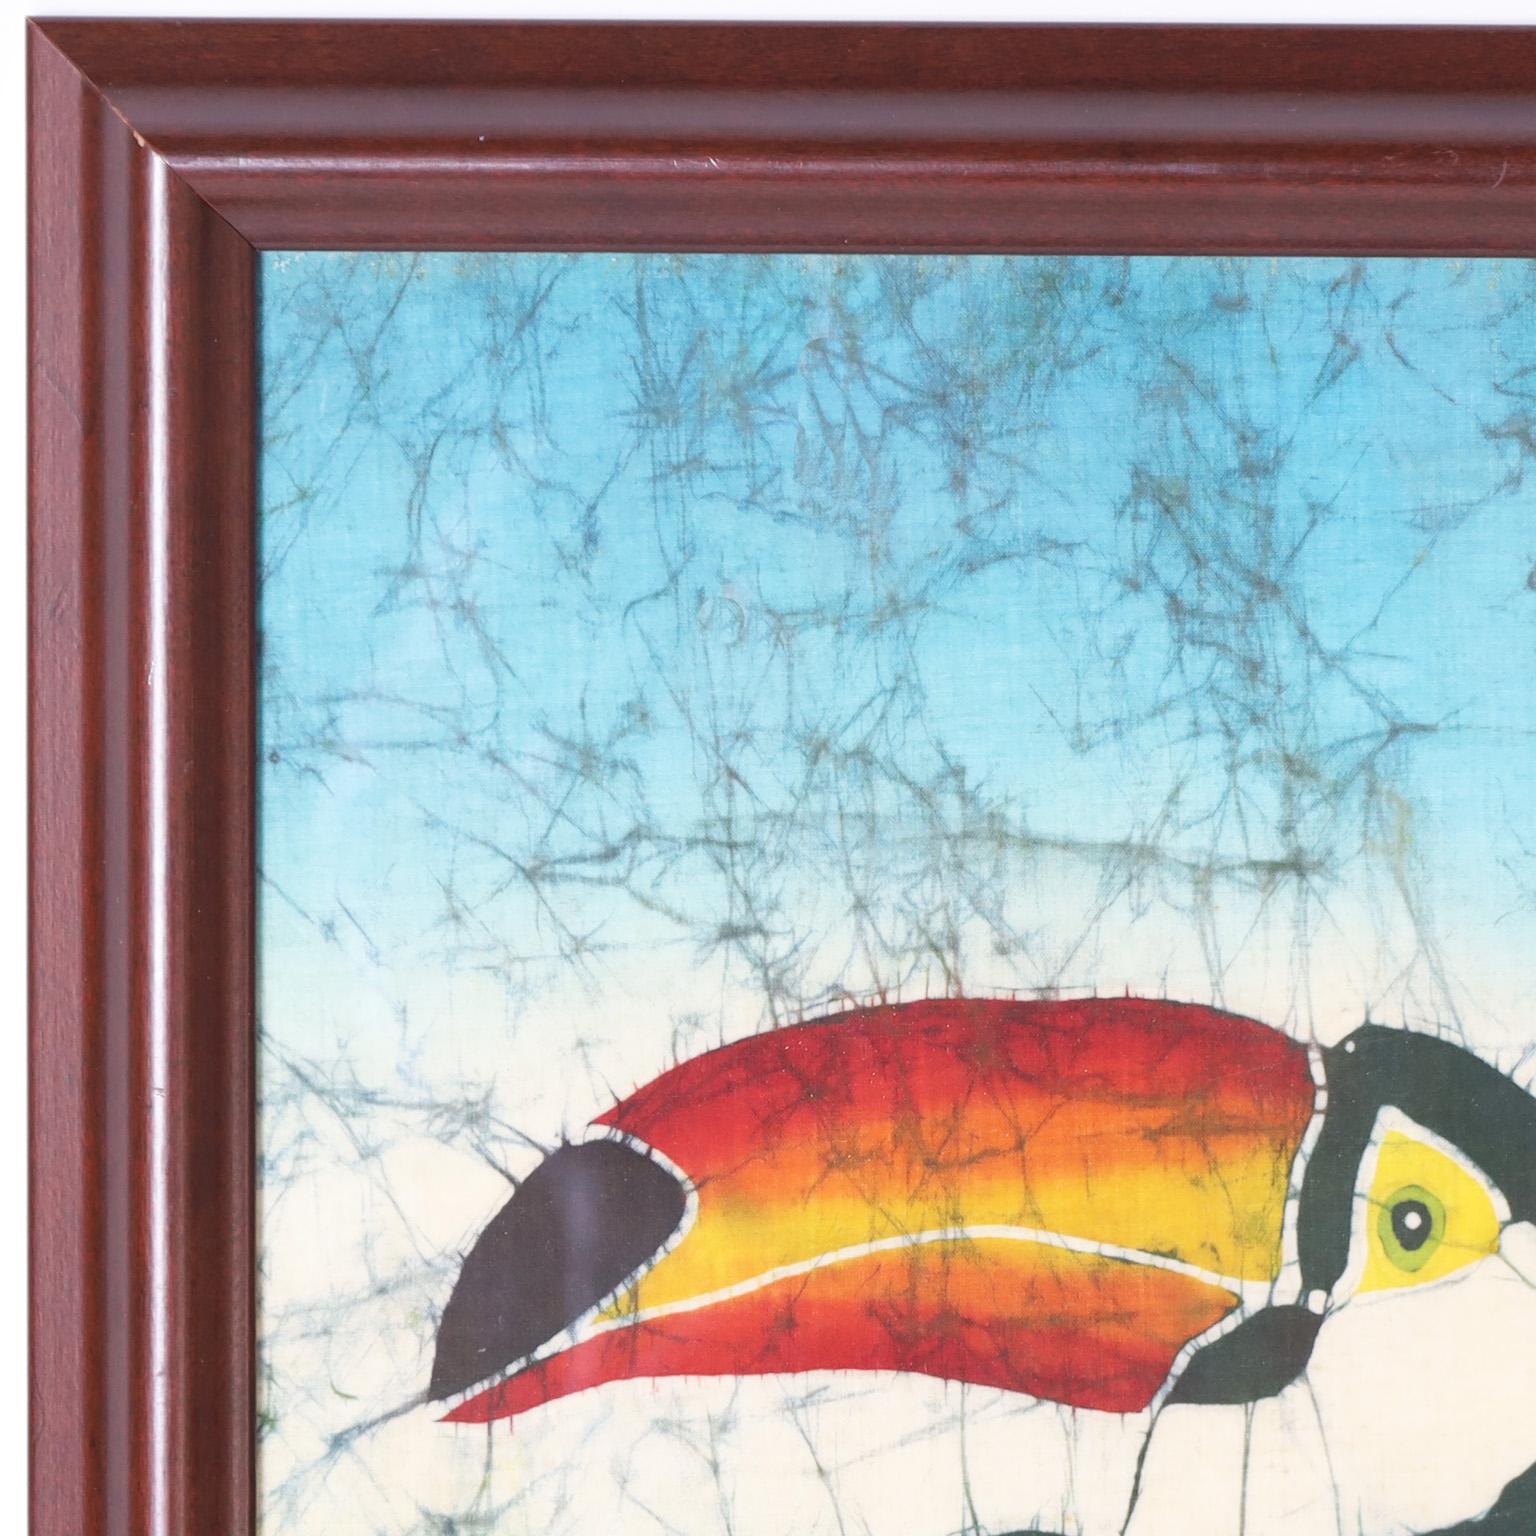 Transporting artwork of a toucan in a tree expertly executed in a batik dying technique on silk and indistinctly signed. Presented under glass in a wood frame.